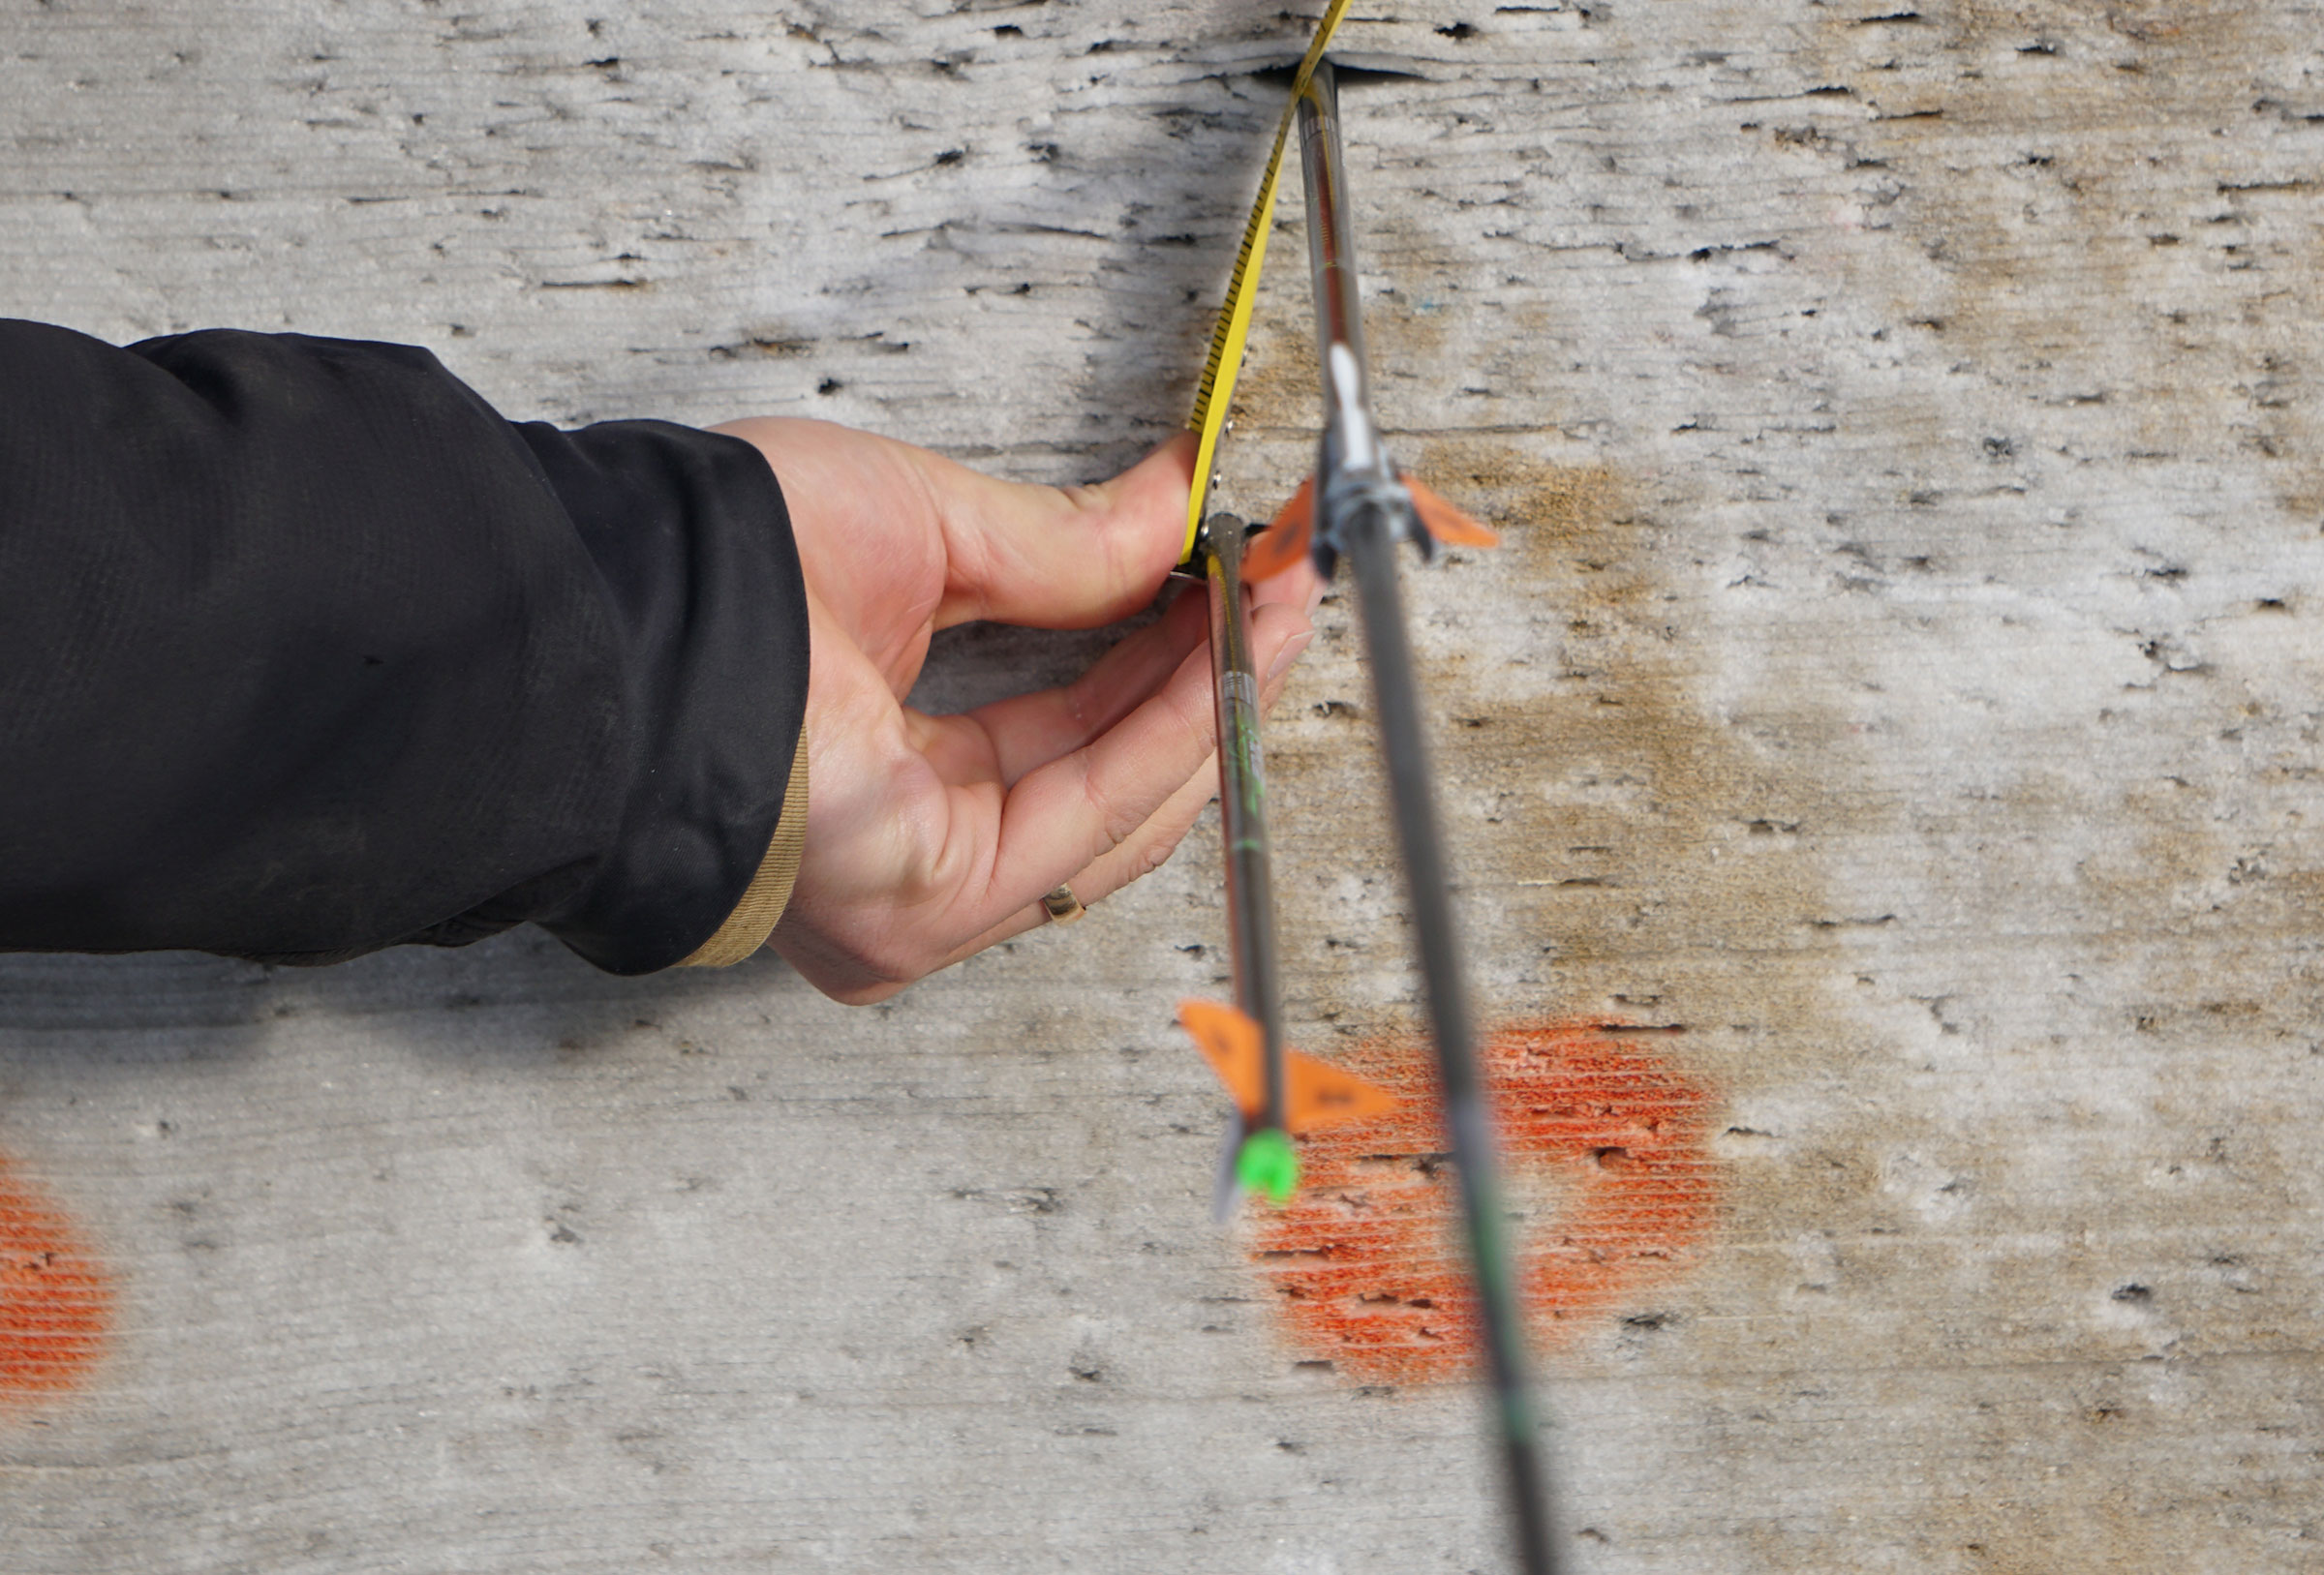 A robinhood shot with the PSE Levitate compound bow at 50 yards.